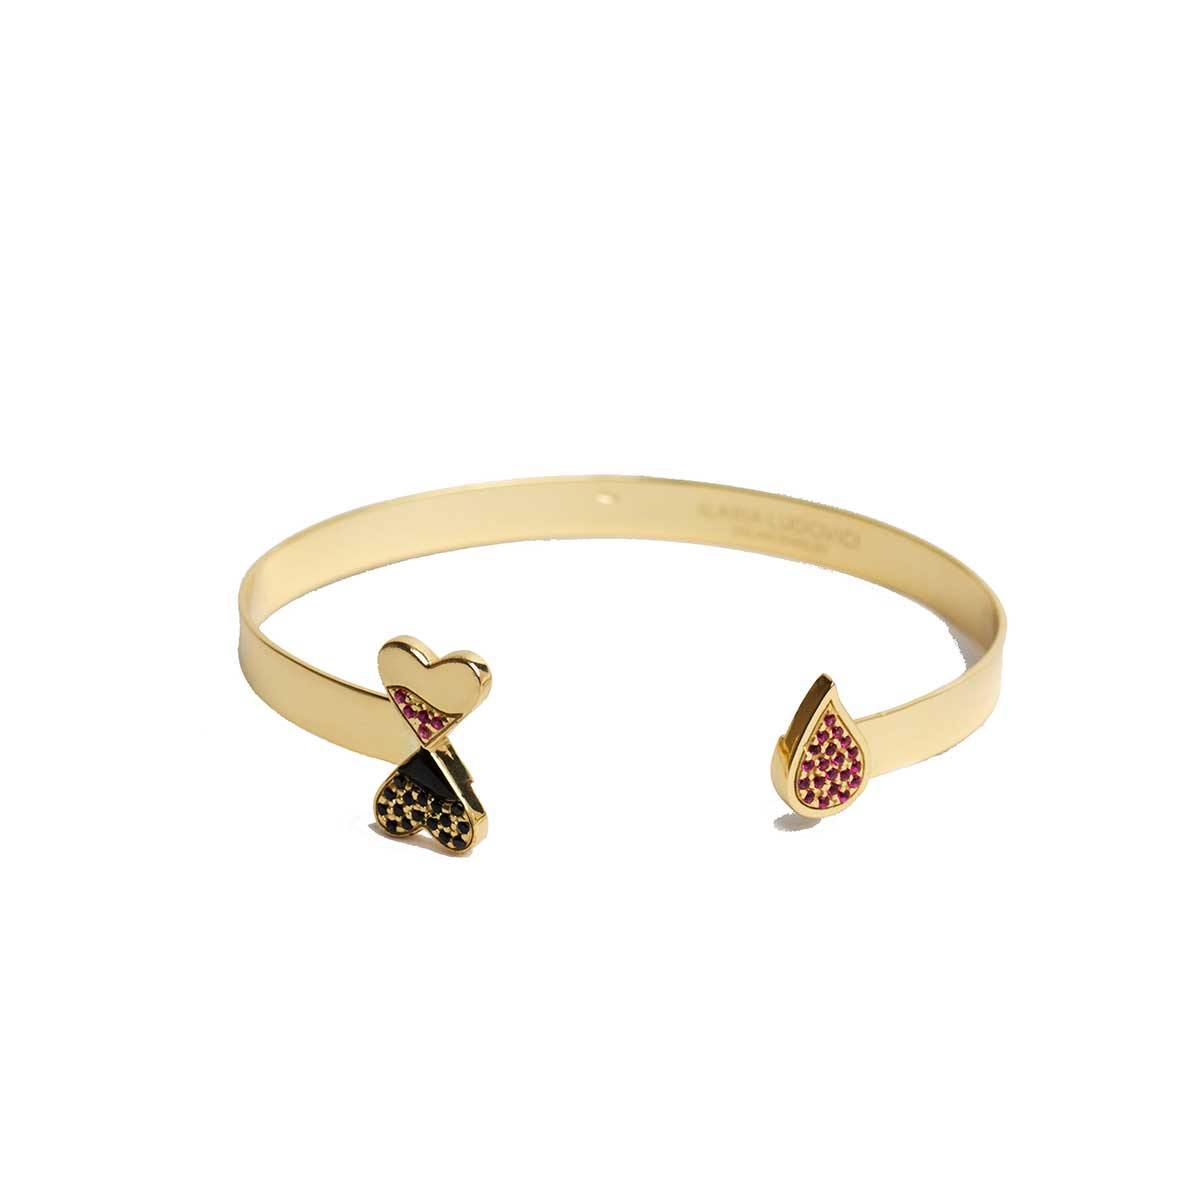 925 Sterling Silver Open Handmade Cuff Bracelet in 18K Gold Plating and Studded Red and Black Cubic Zirconia